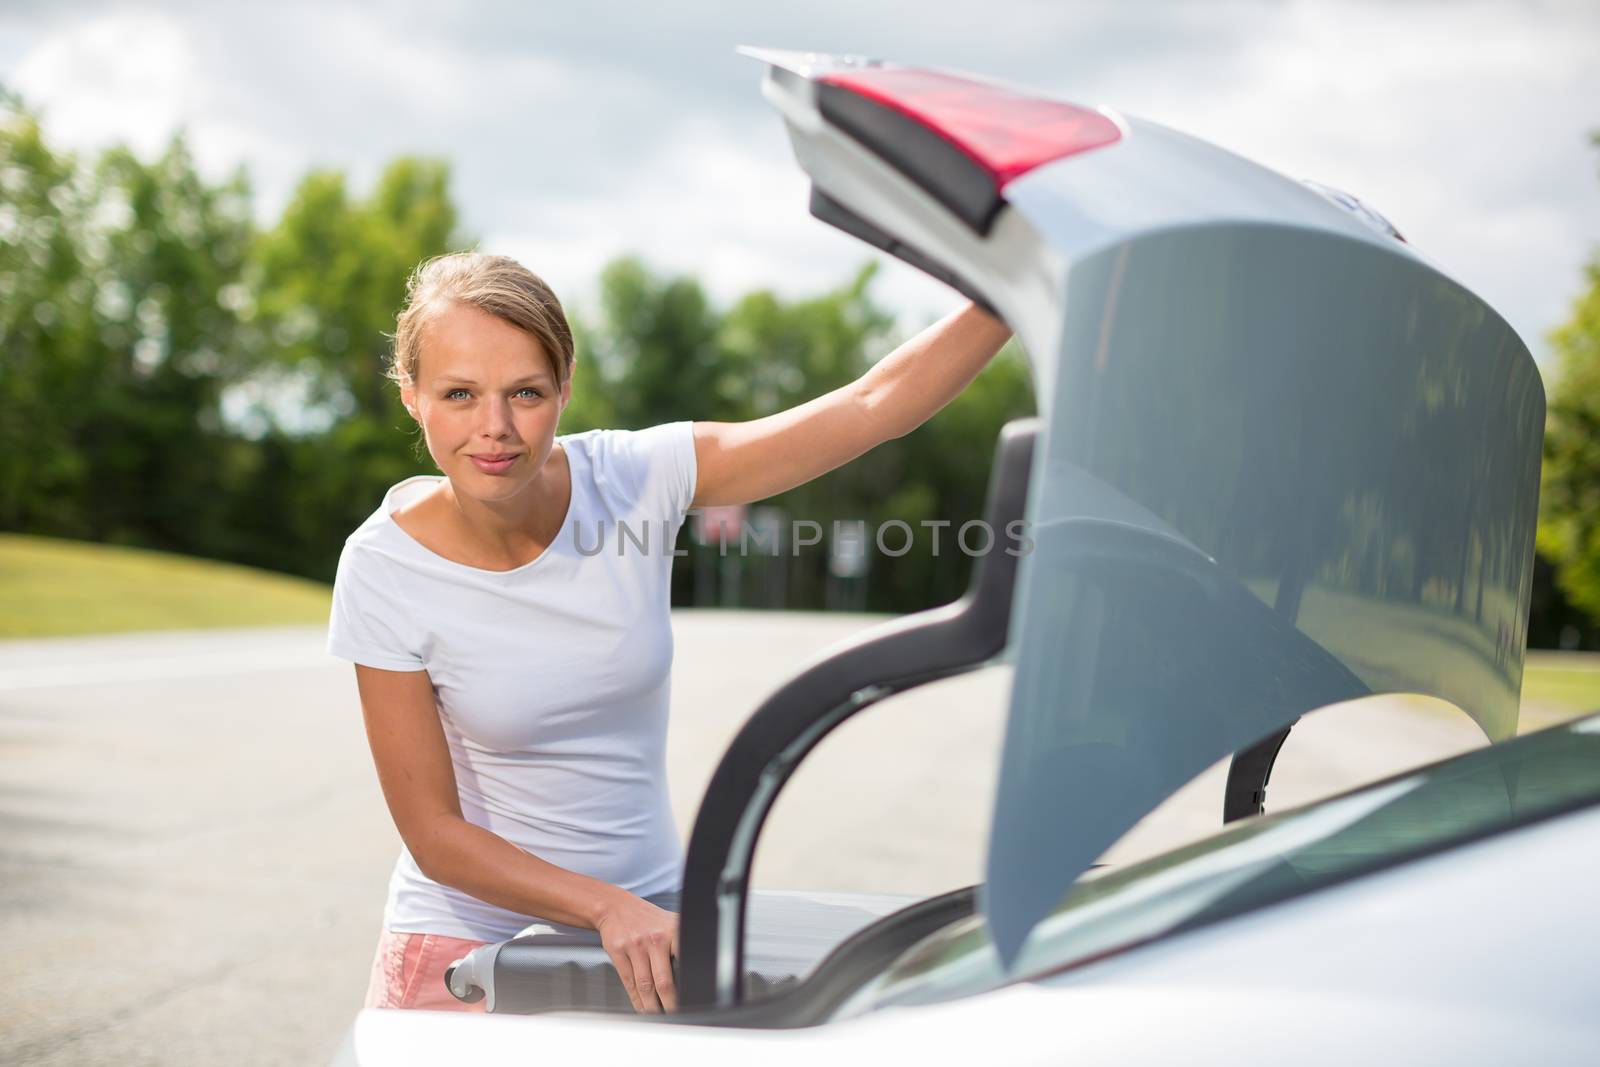 Young, attractive, happy woman taking a suitcase from her car's trunk, smiling, enjoying the travel experience